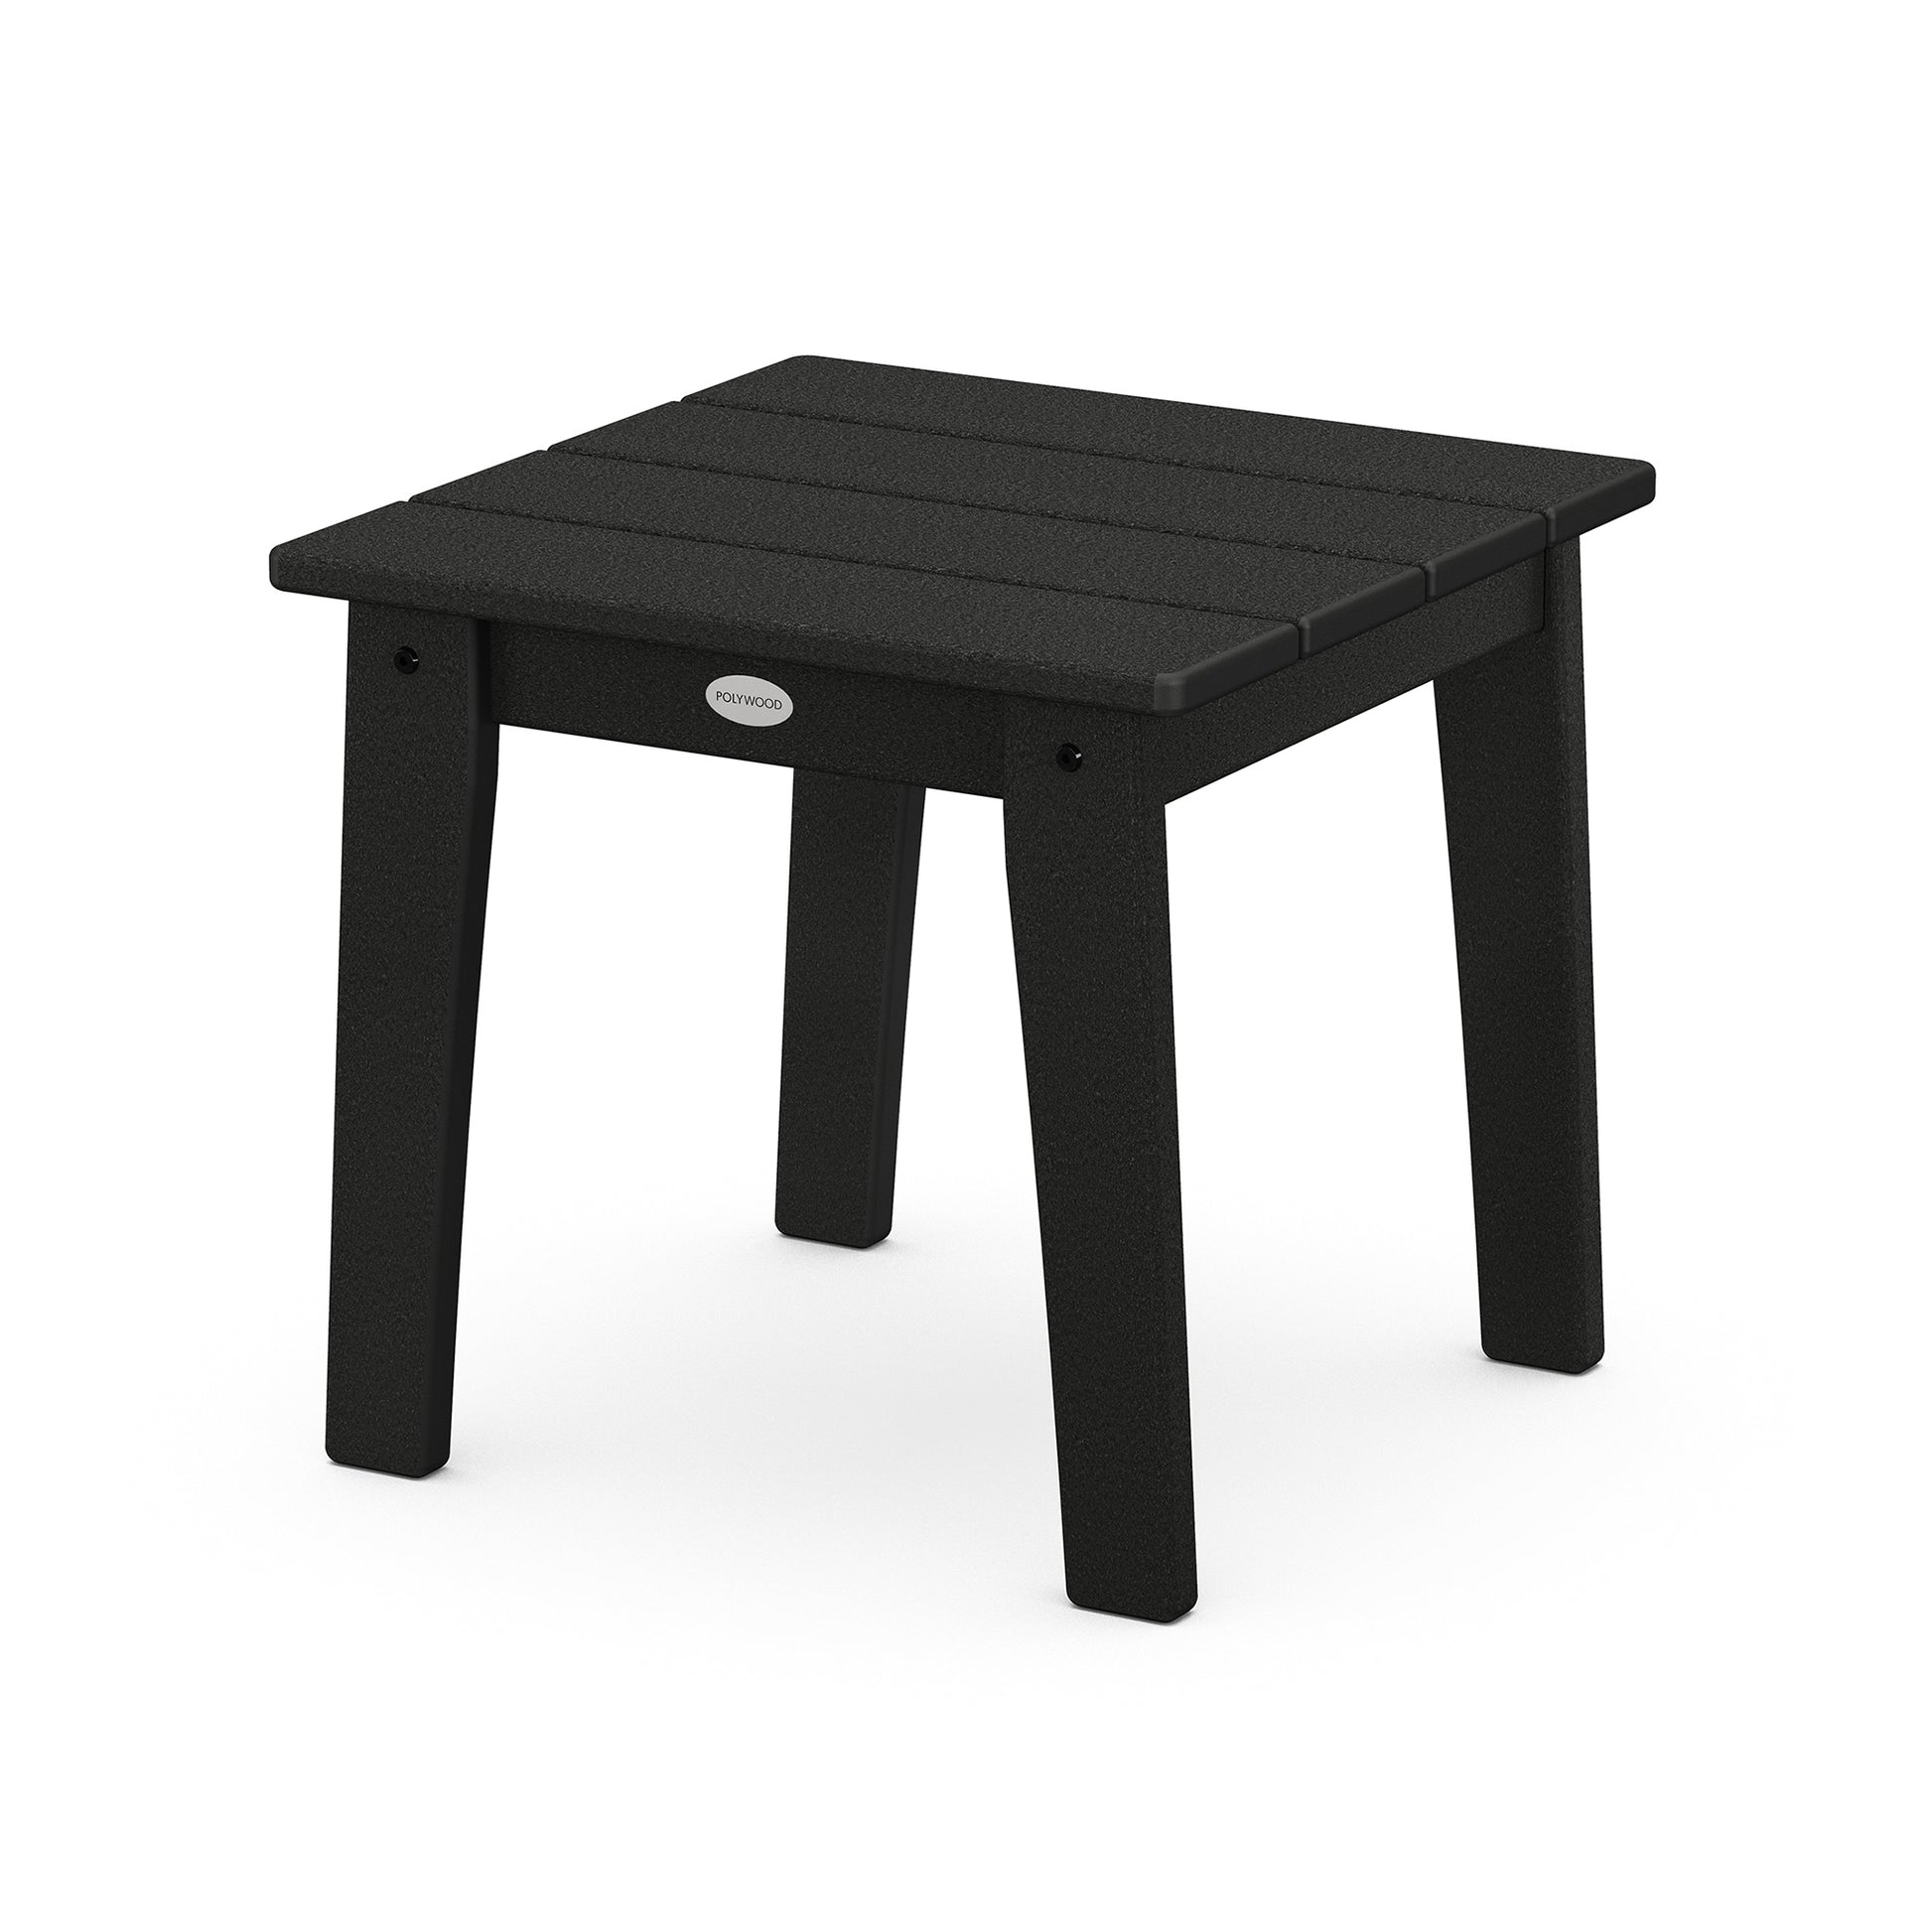 A small black POLYWOOD Lakeside 18" End Table made of durable POLYWOOD, featuring a simple rectangular top and four sturdy legs, isolated on a white background.